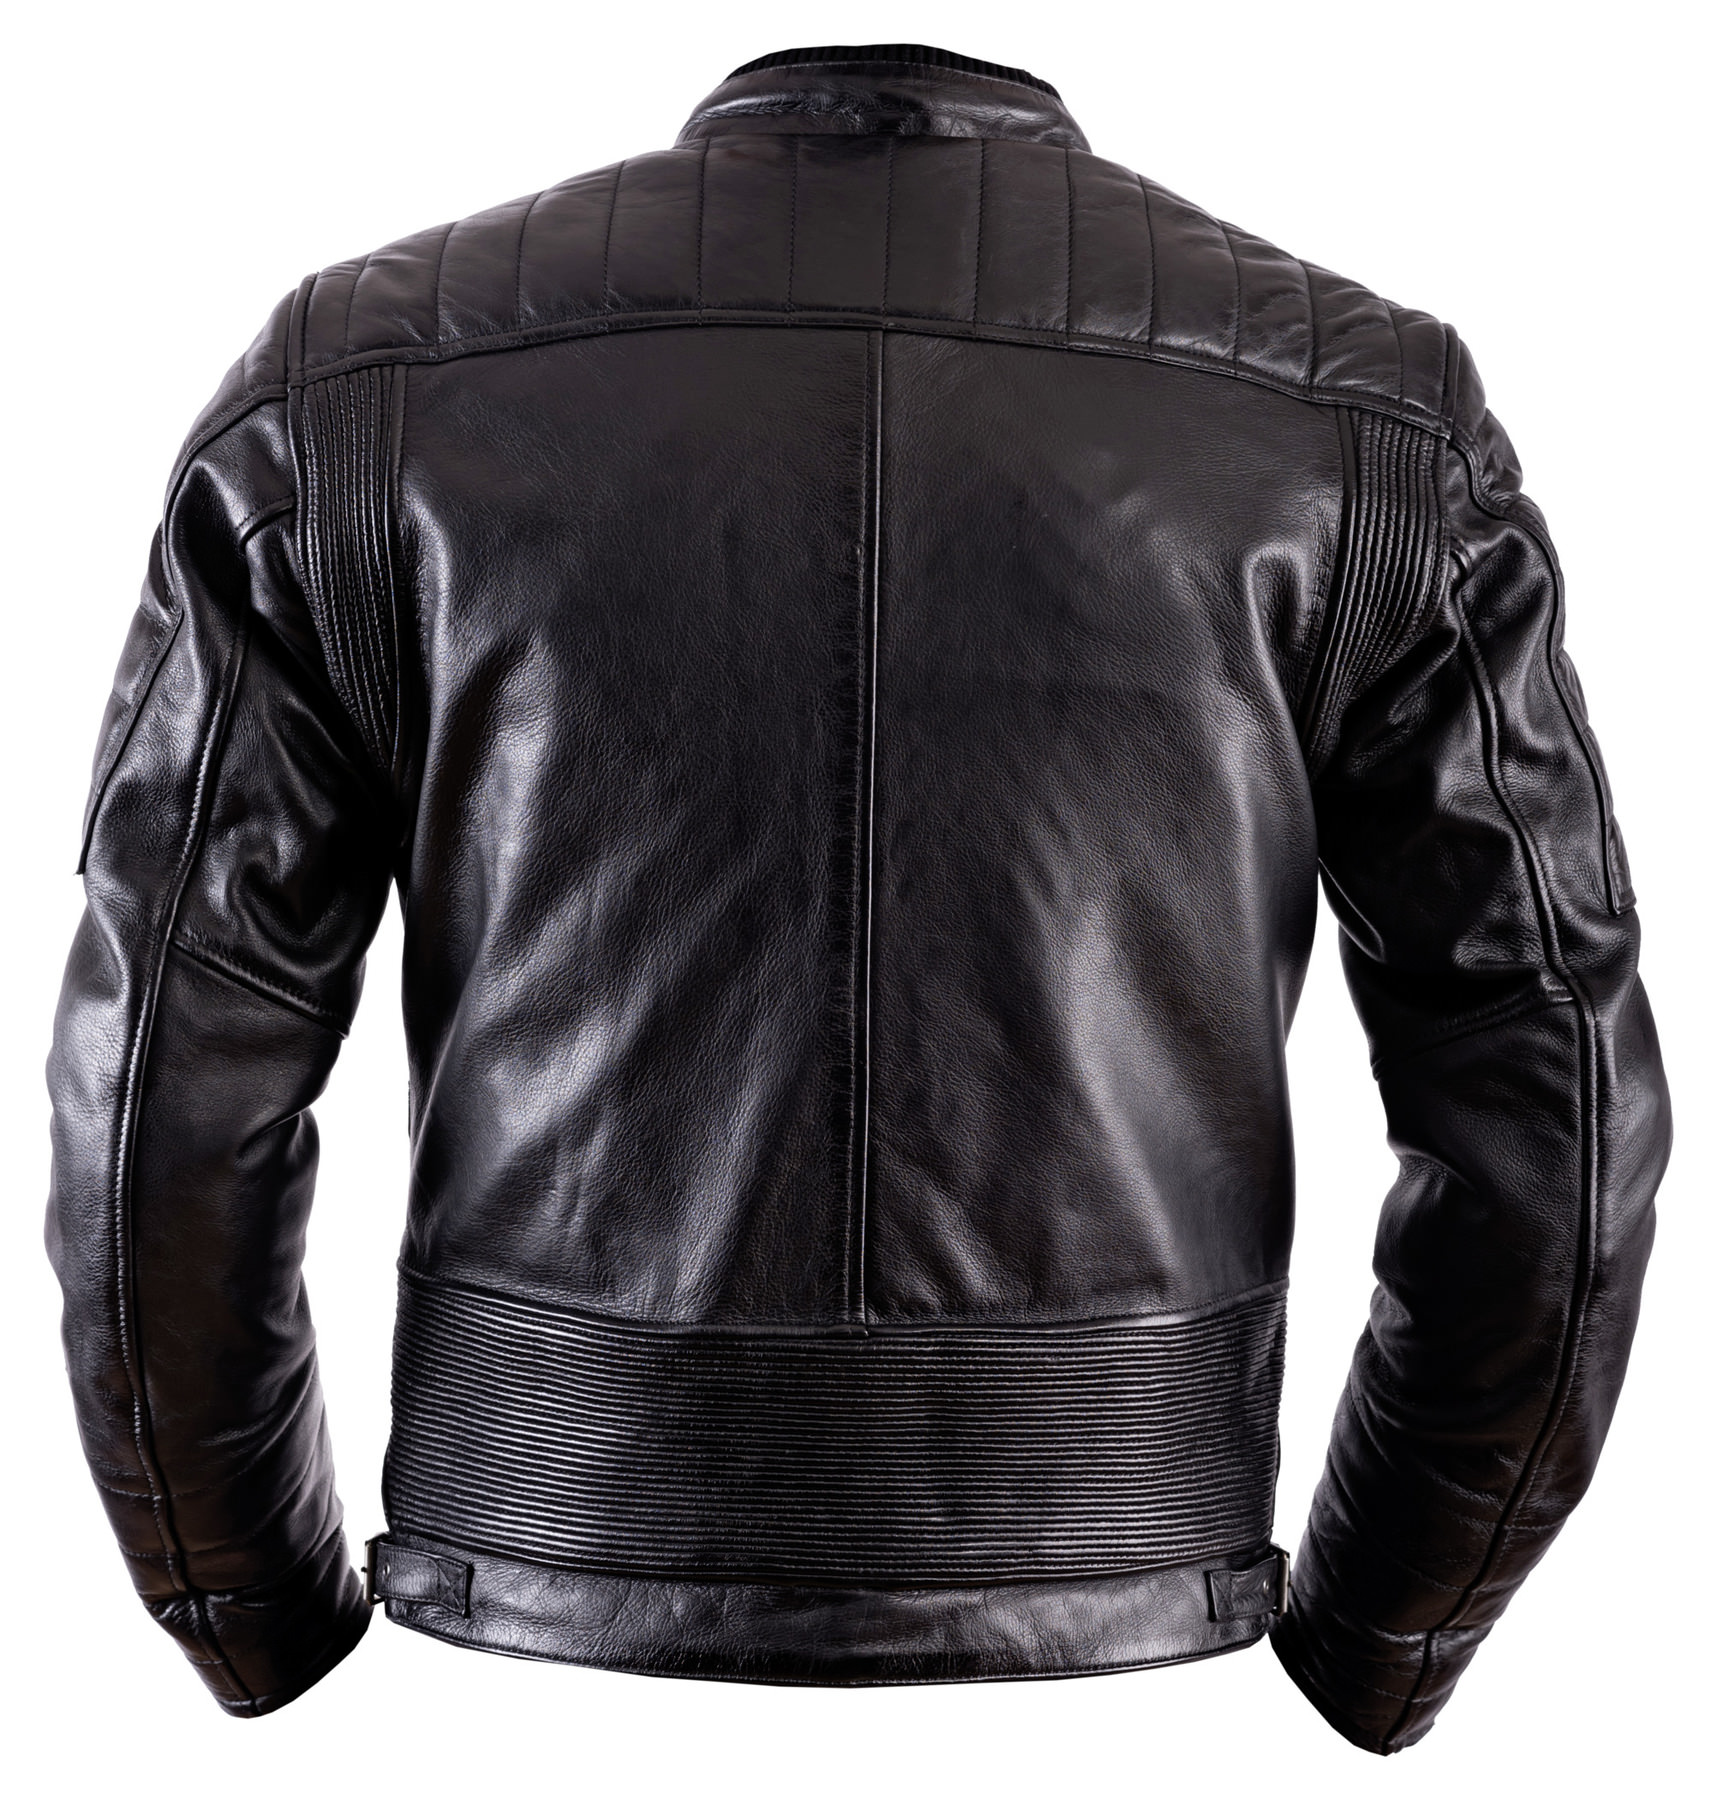 Buy helstons Cruiser Rag leather jacket | Louis motorcycle clothing and ...